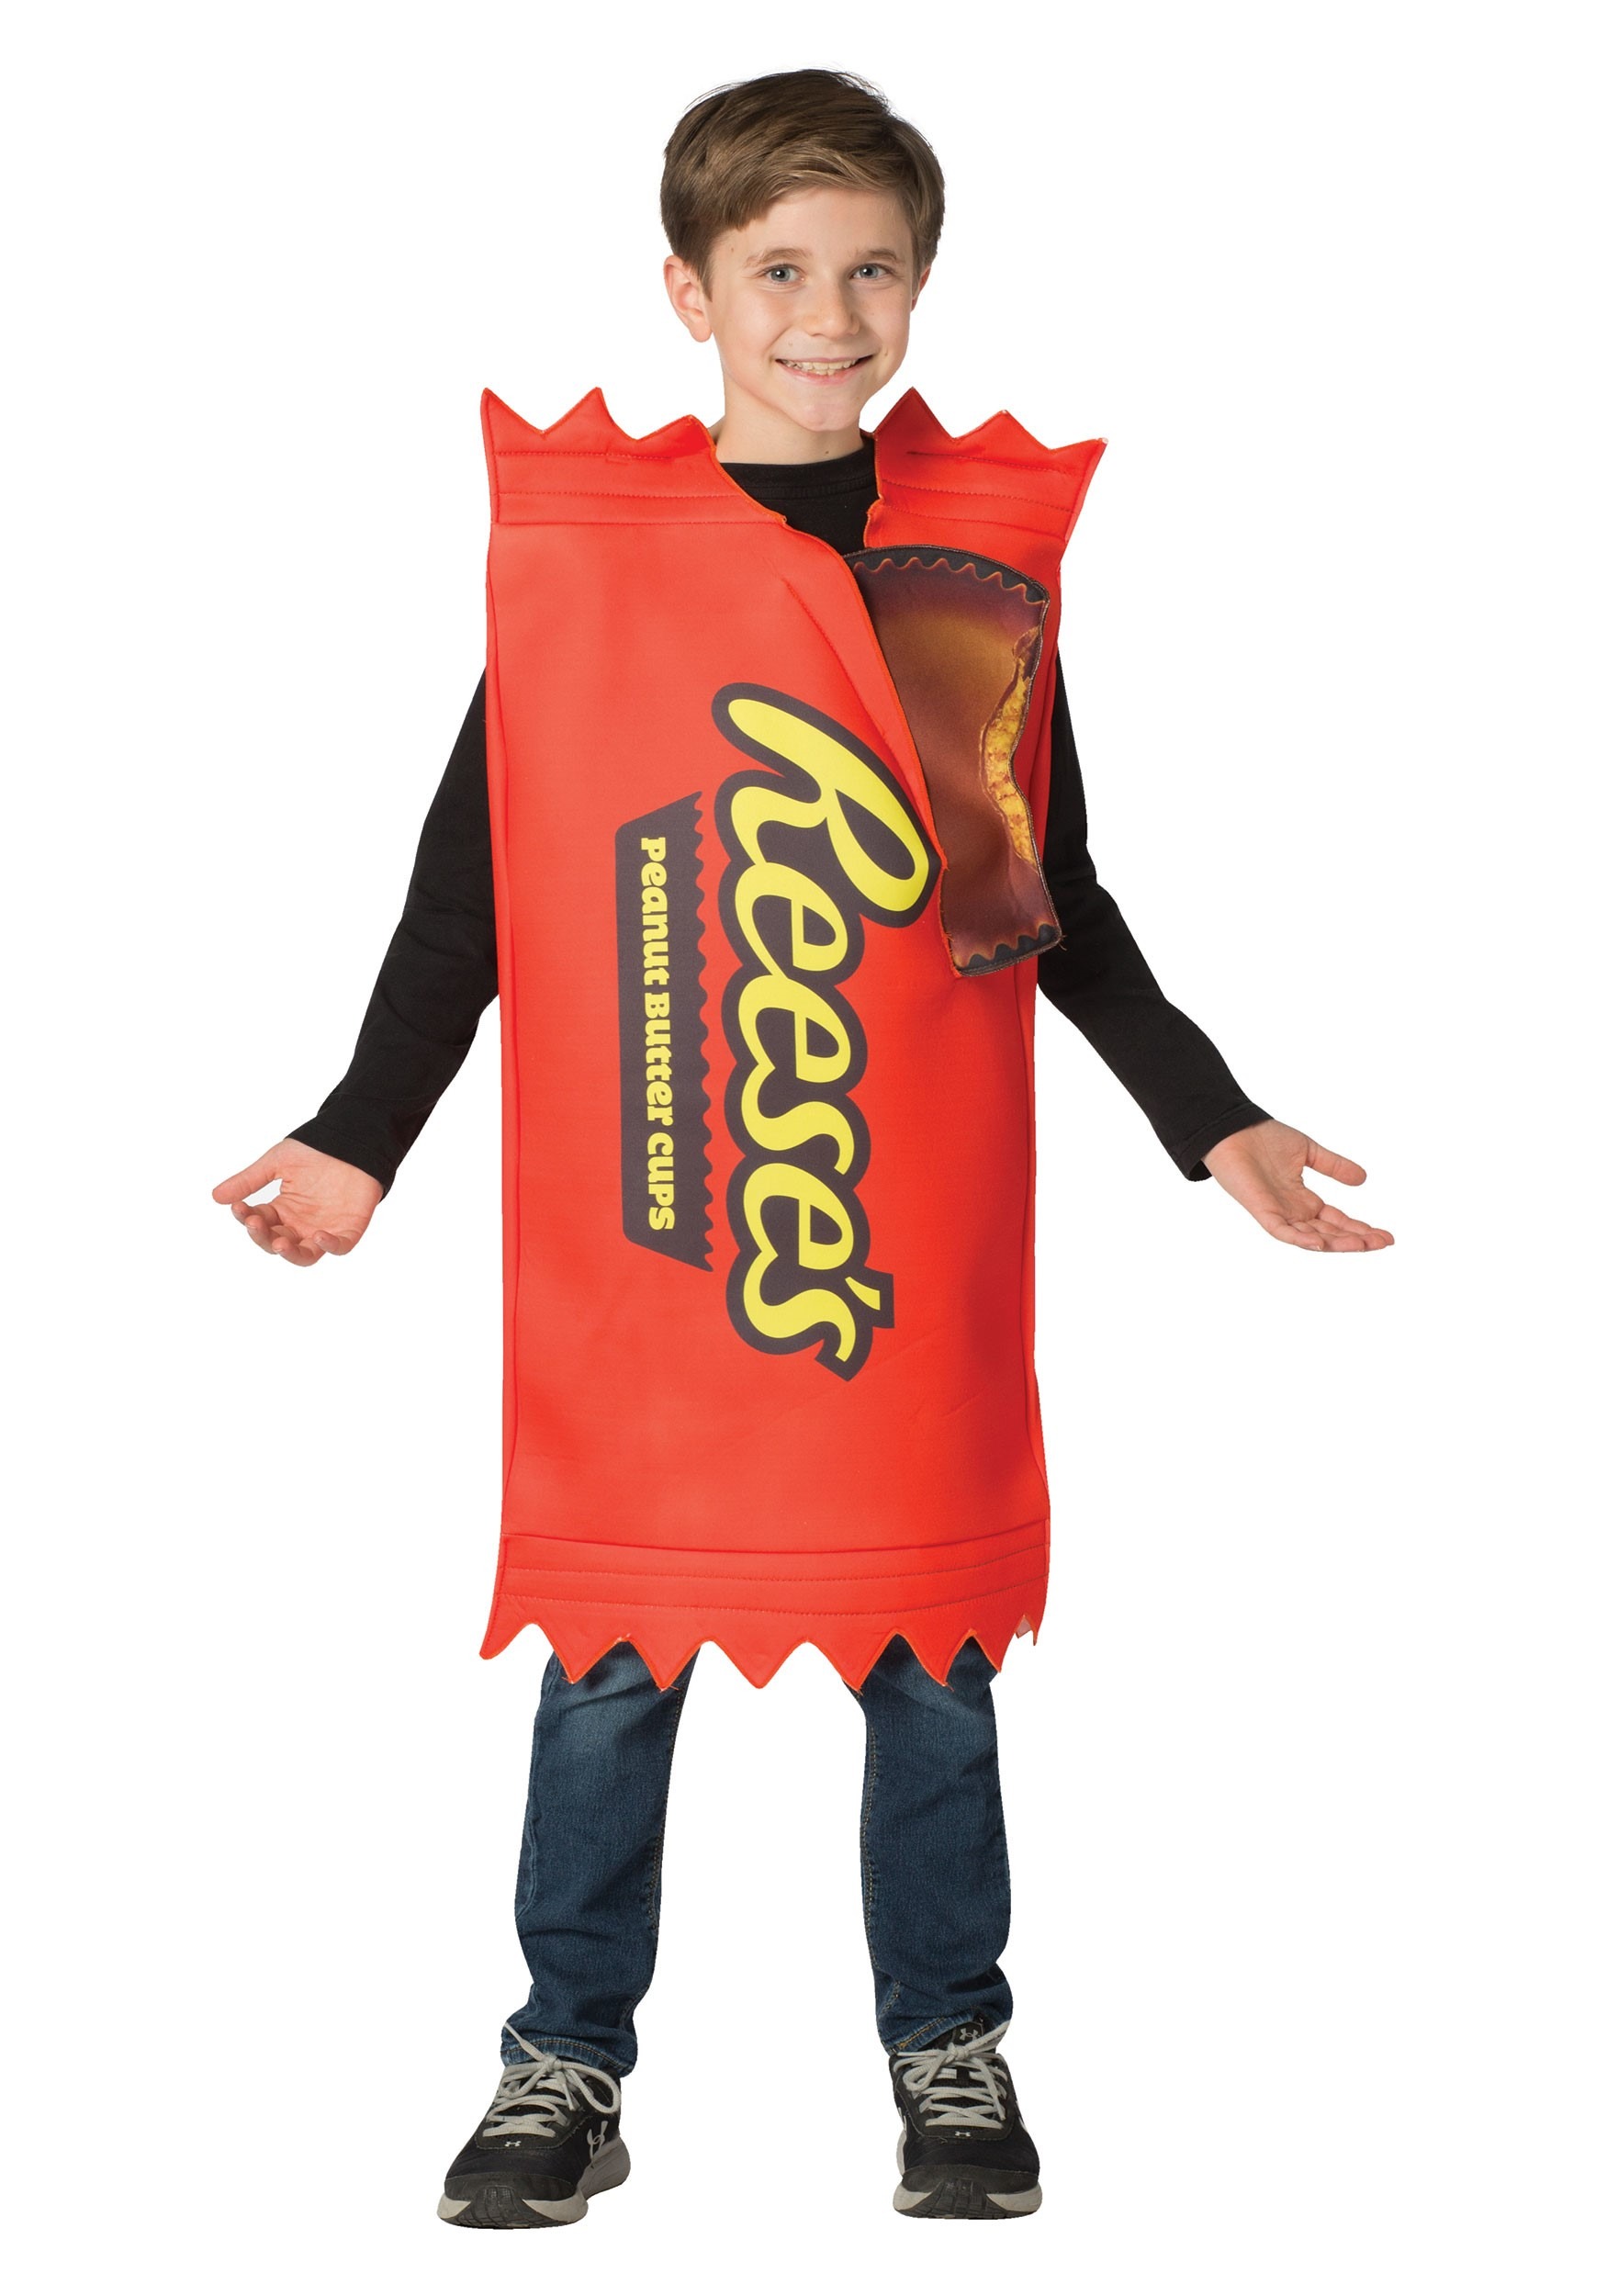 Reese's Kids Reese's Cup 2 paquete Multicolor